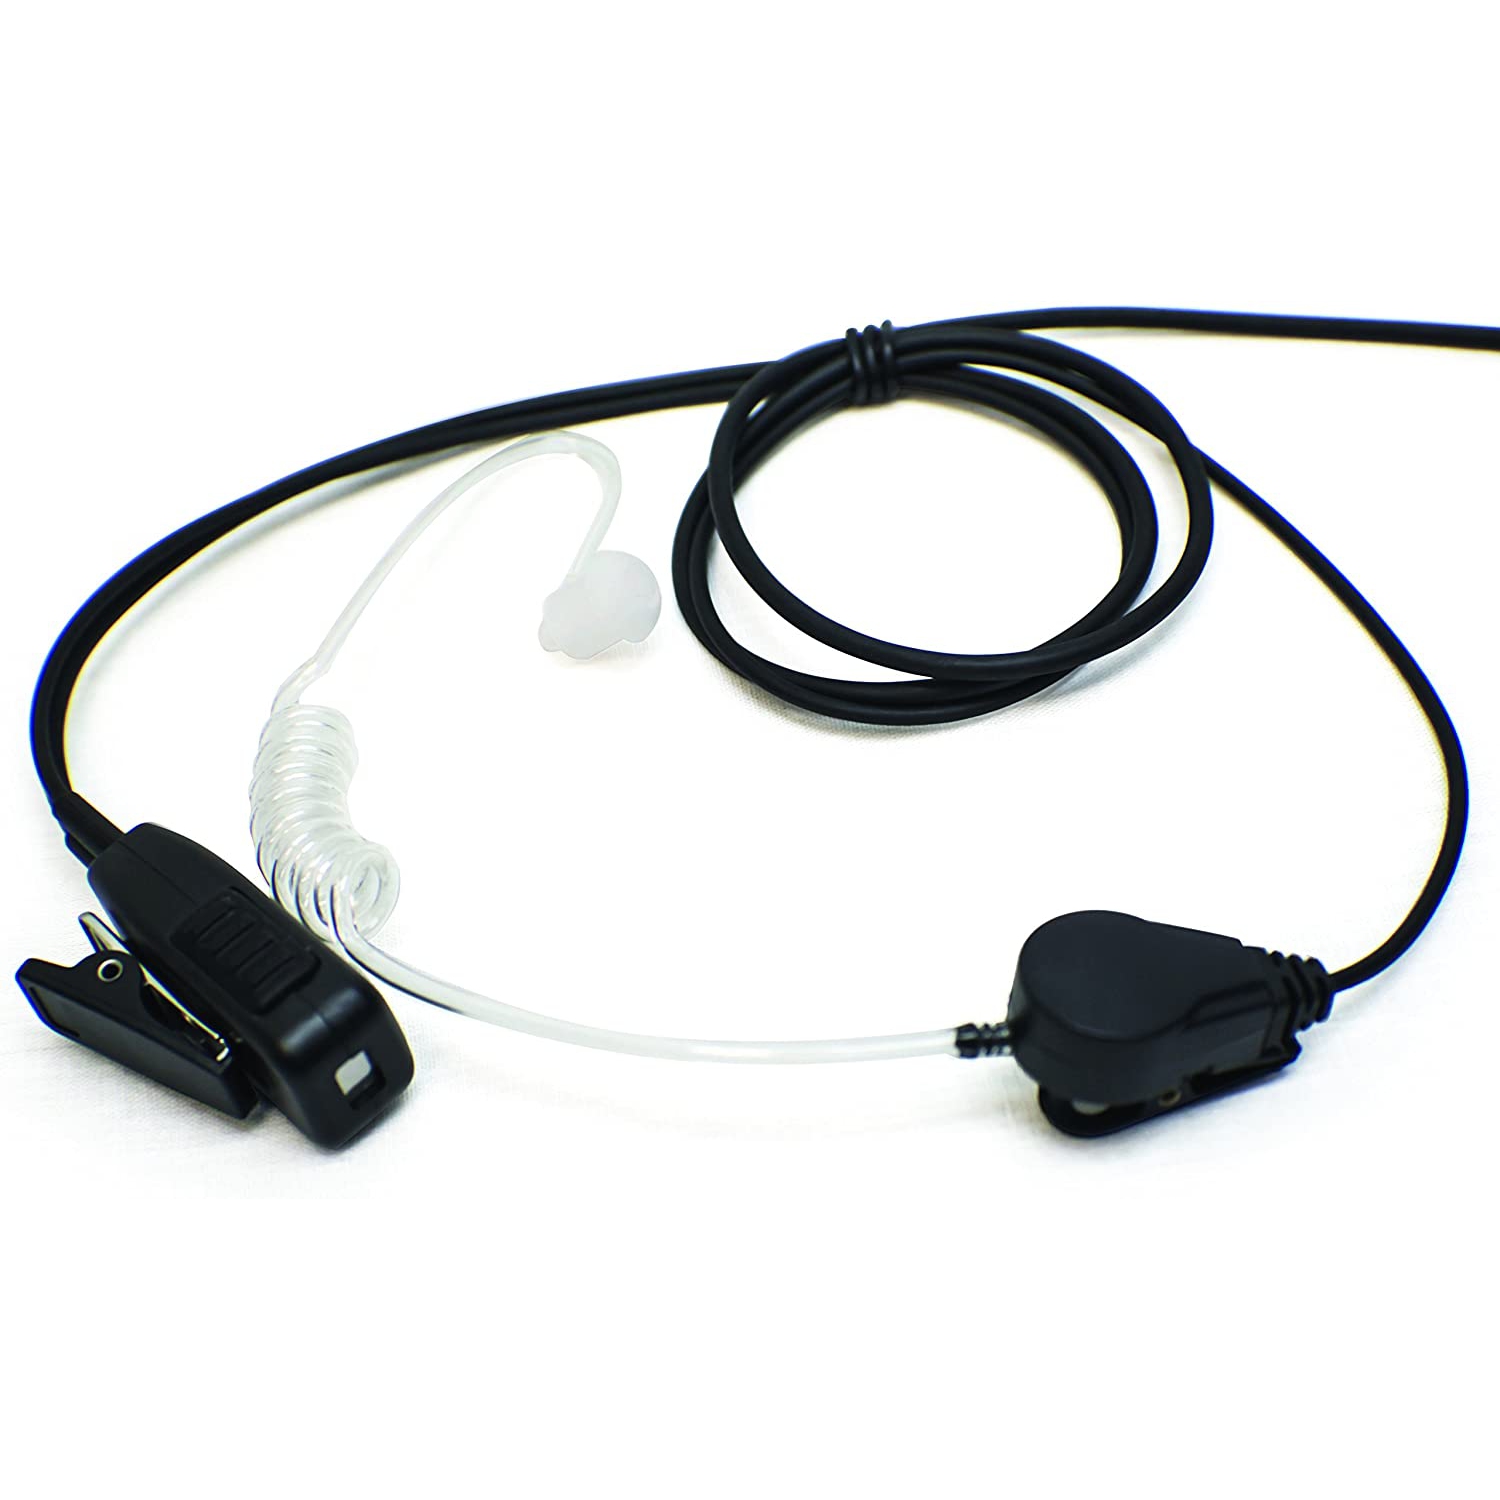 Single-Wire Surveillance Earpiece Mic for All Kenwood Baofeng and Retevis 2-Prong Audio Port Radio Models